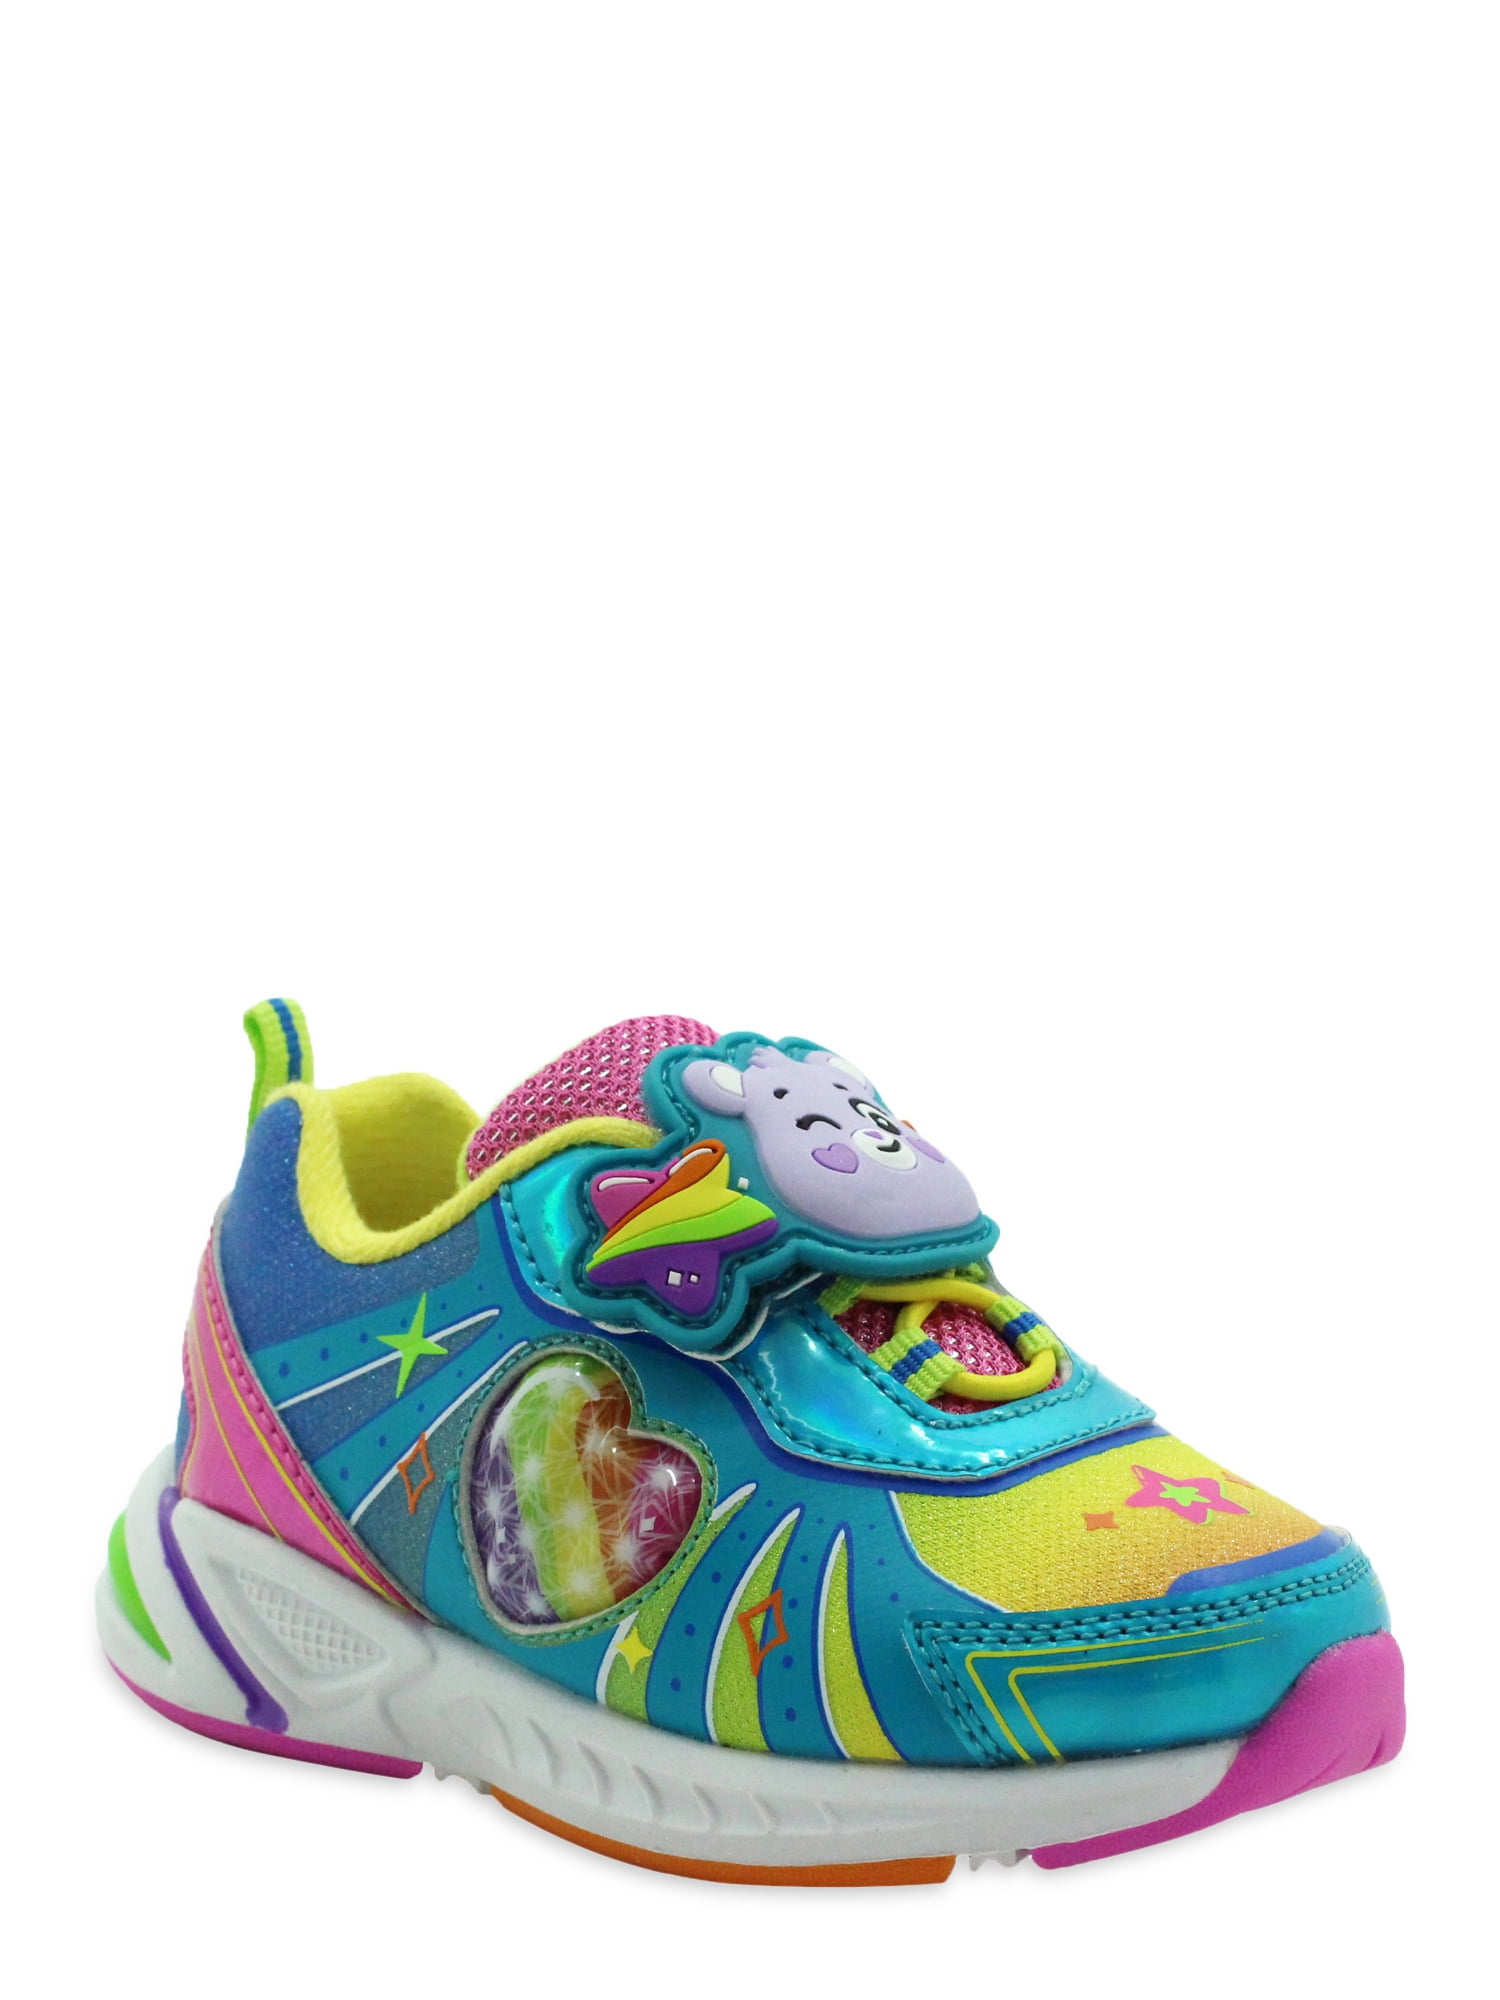 Baby Shark Toddler Girls Lighted Athletic Sneakers, Sizes 7-12 